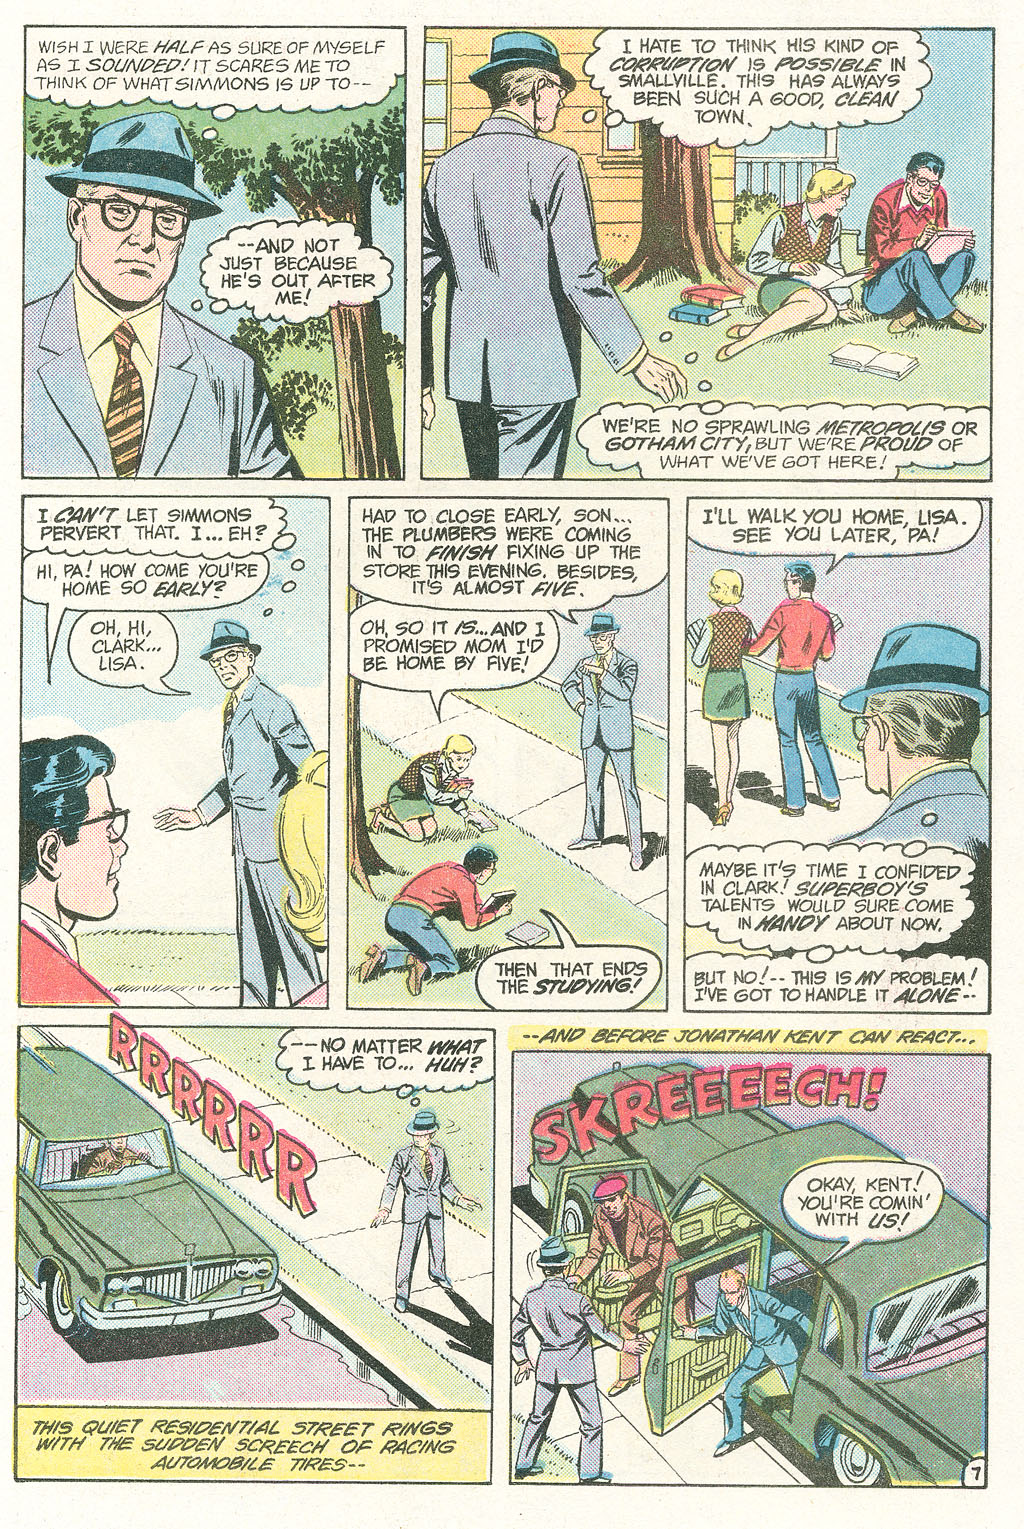 The New Adventures of Superboy 54 Page 10